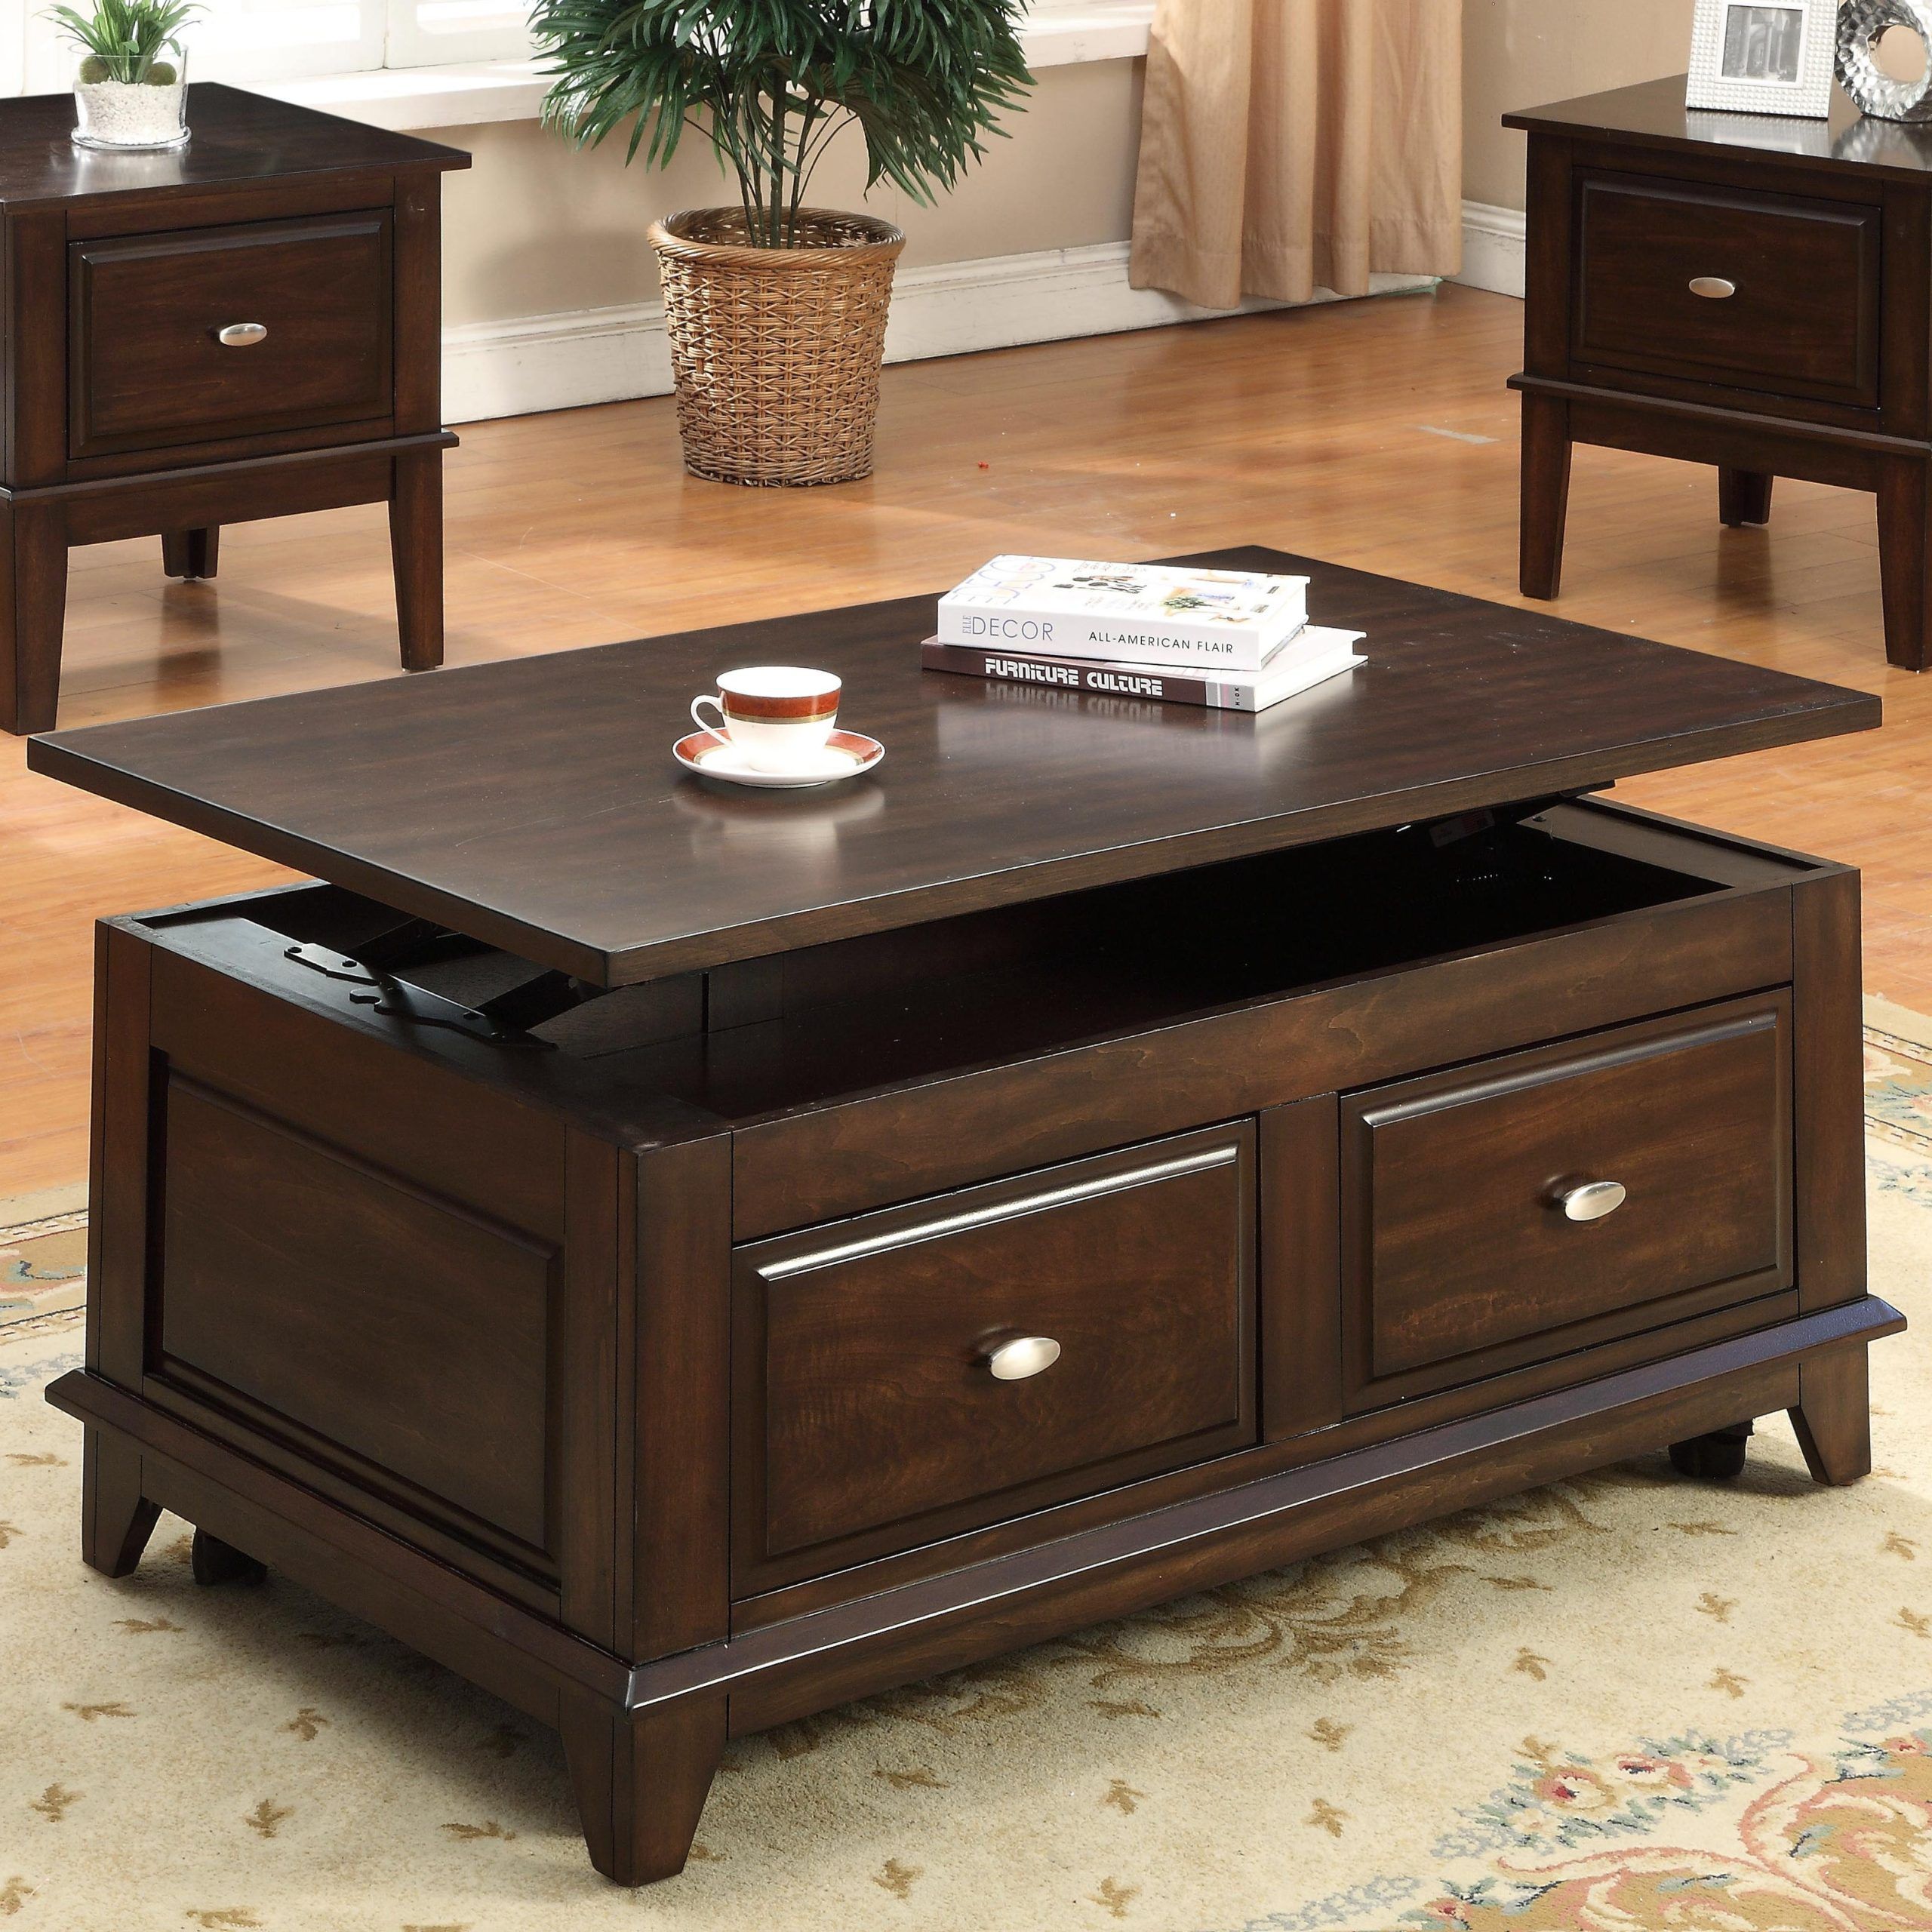 Crown Mark Harmon 4111 01 Lift Top Coffee Table With Casters | Dunk In Lift Top Coffee Tables With Storage (View 7 of 20)